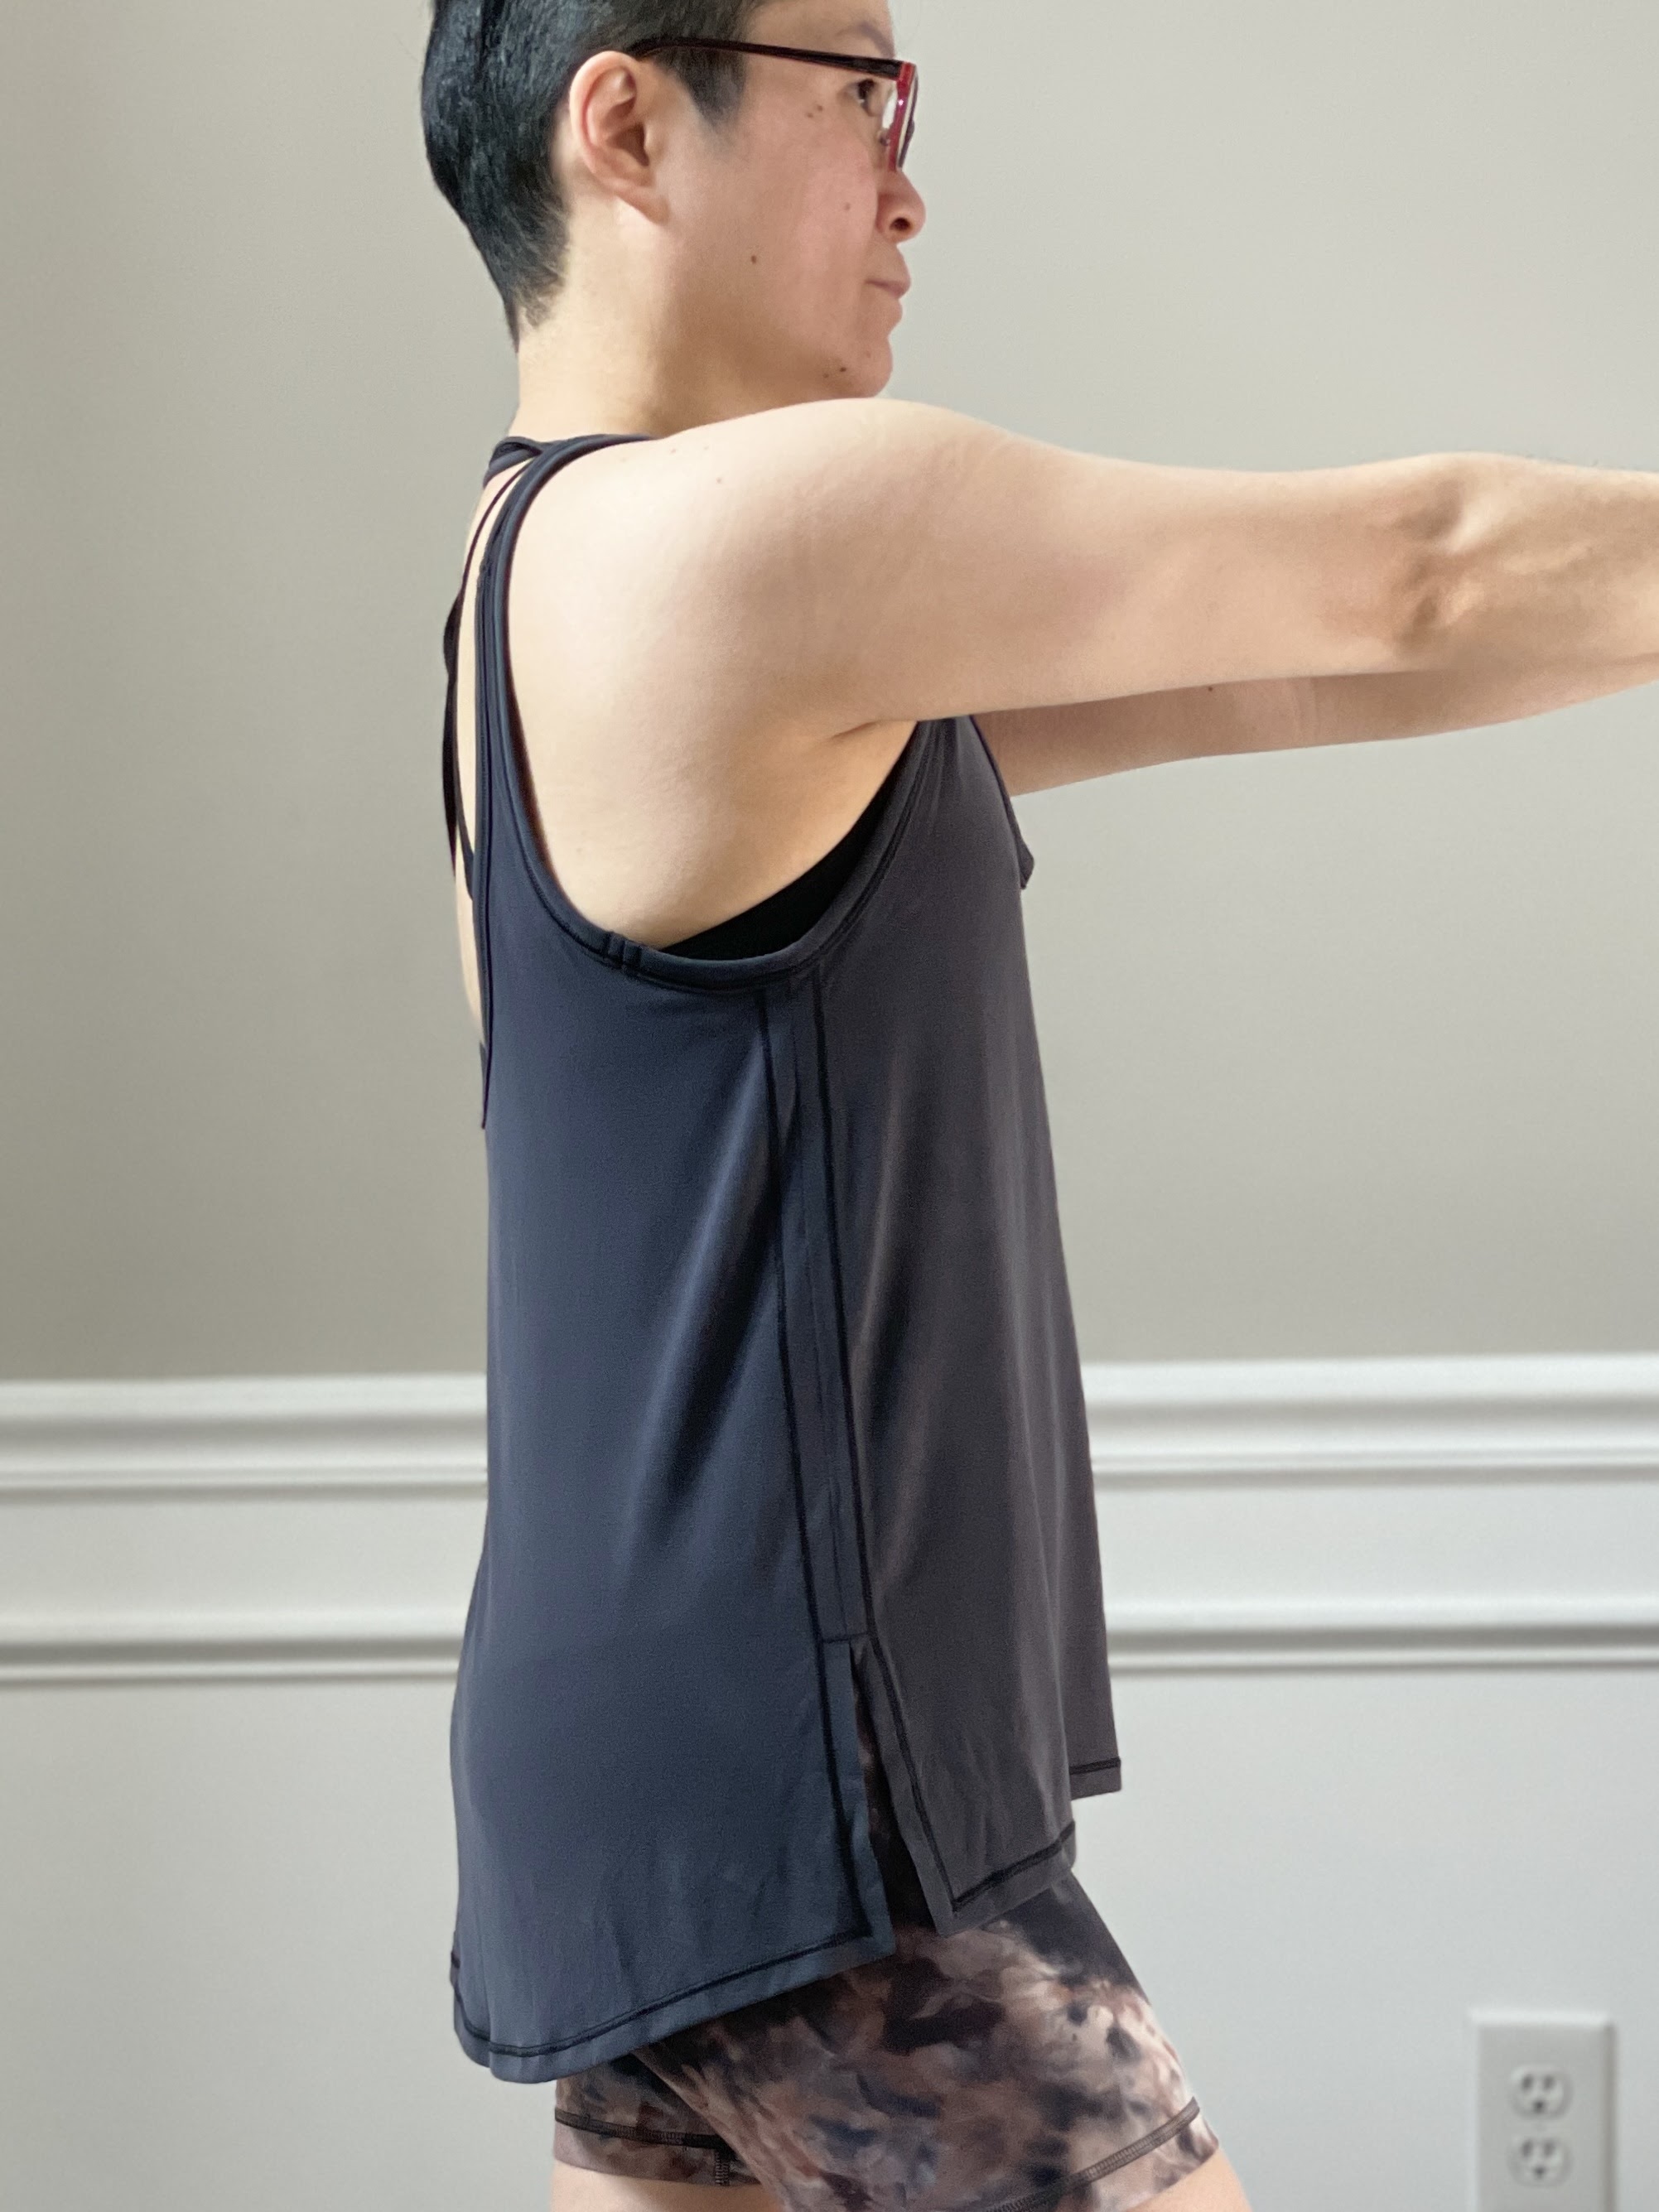 Fit Review Friday! Ease Of It All Tank Top & Align Short 6 Diamond Dye  Smoky Topaz